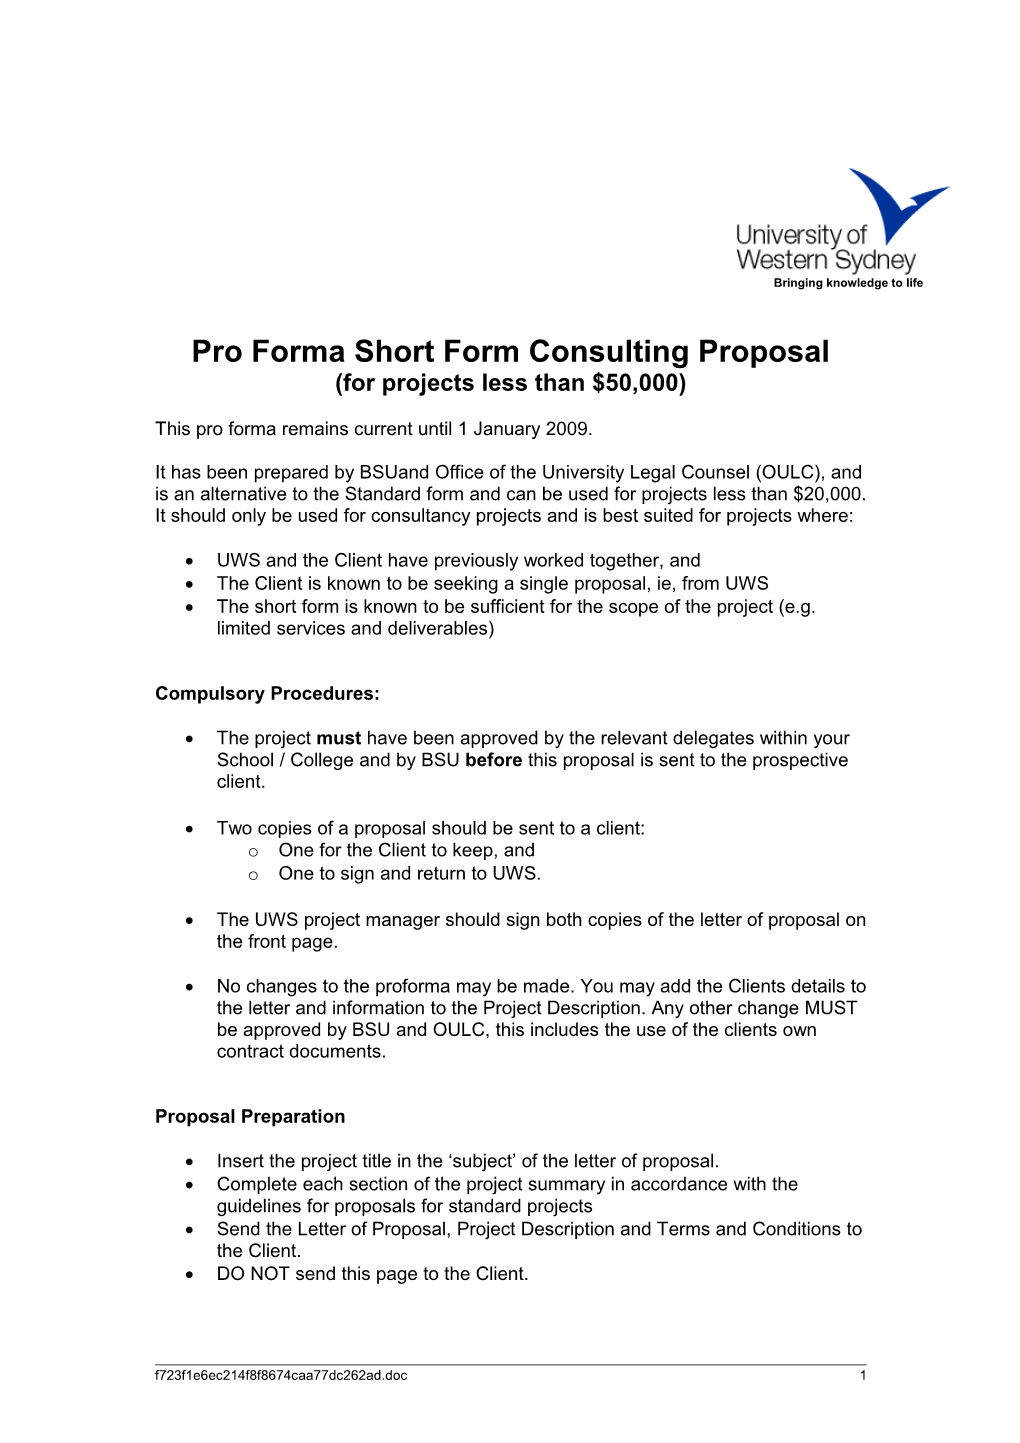 Pro Forma Short Form Consulting Proposal